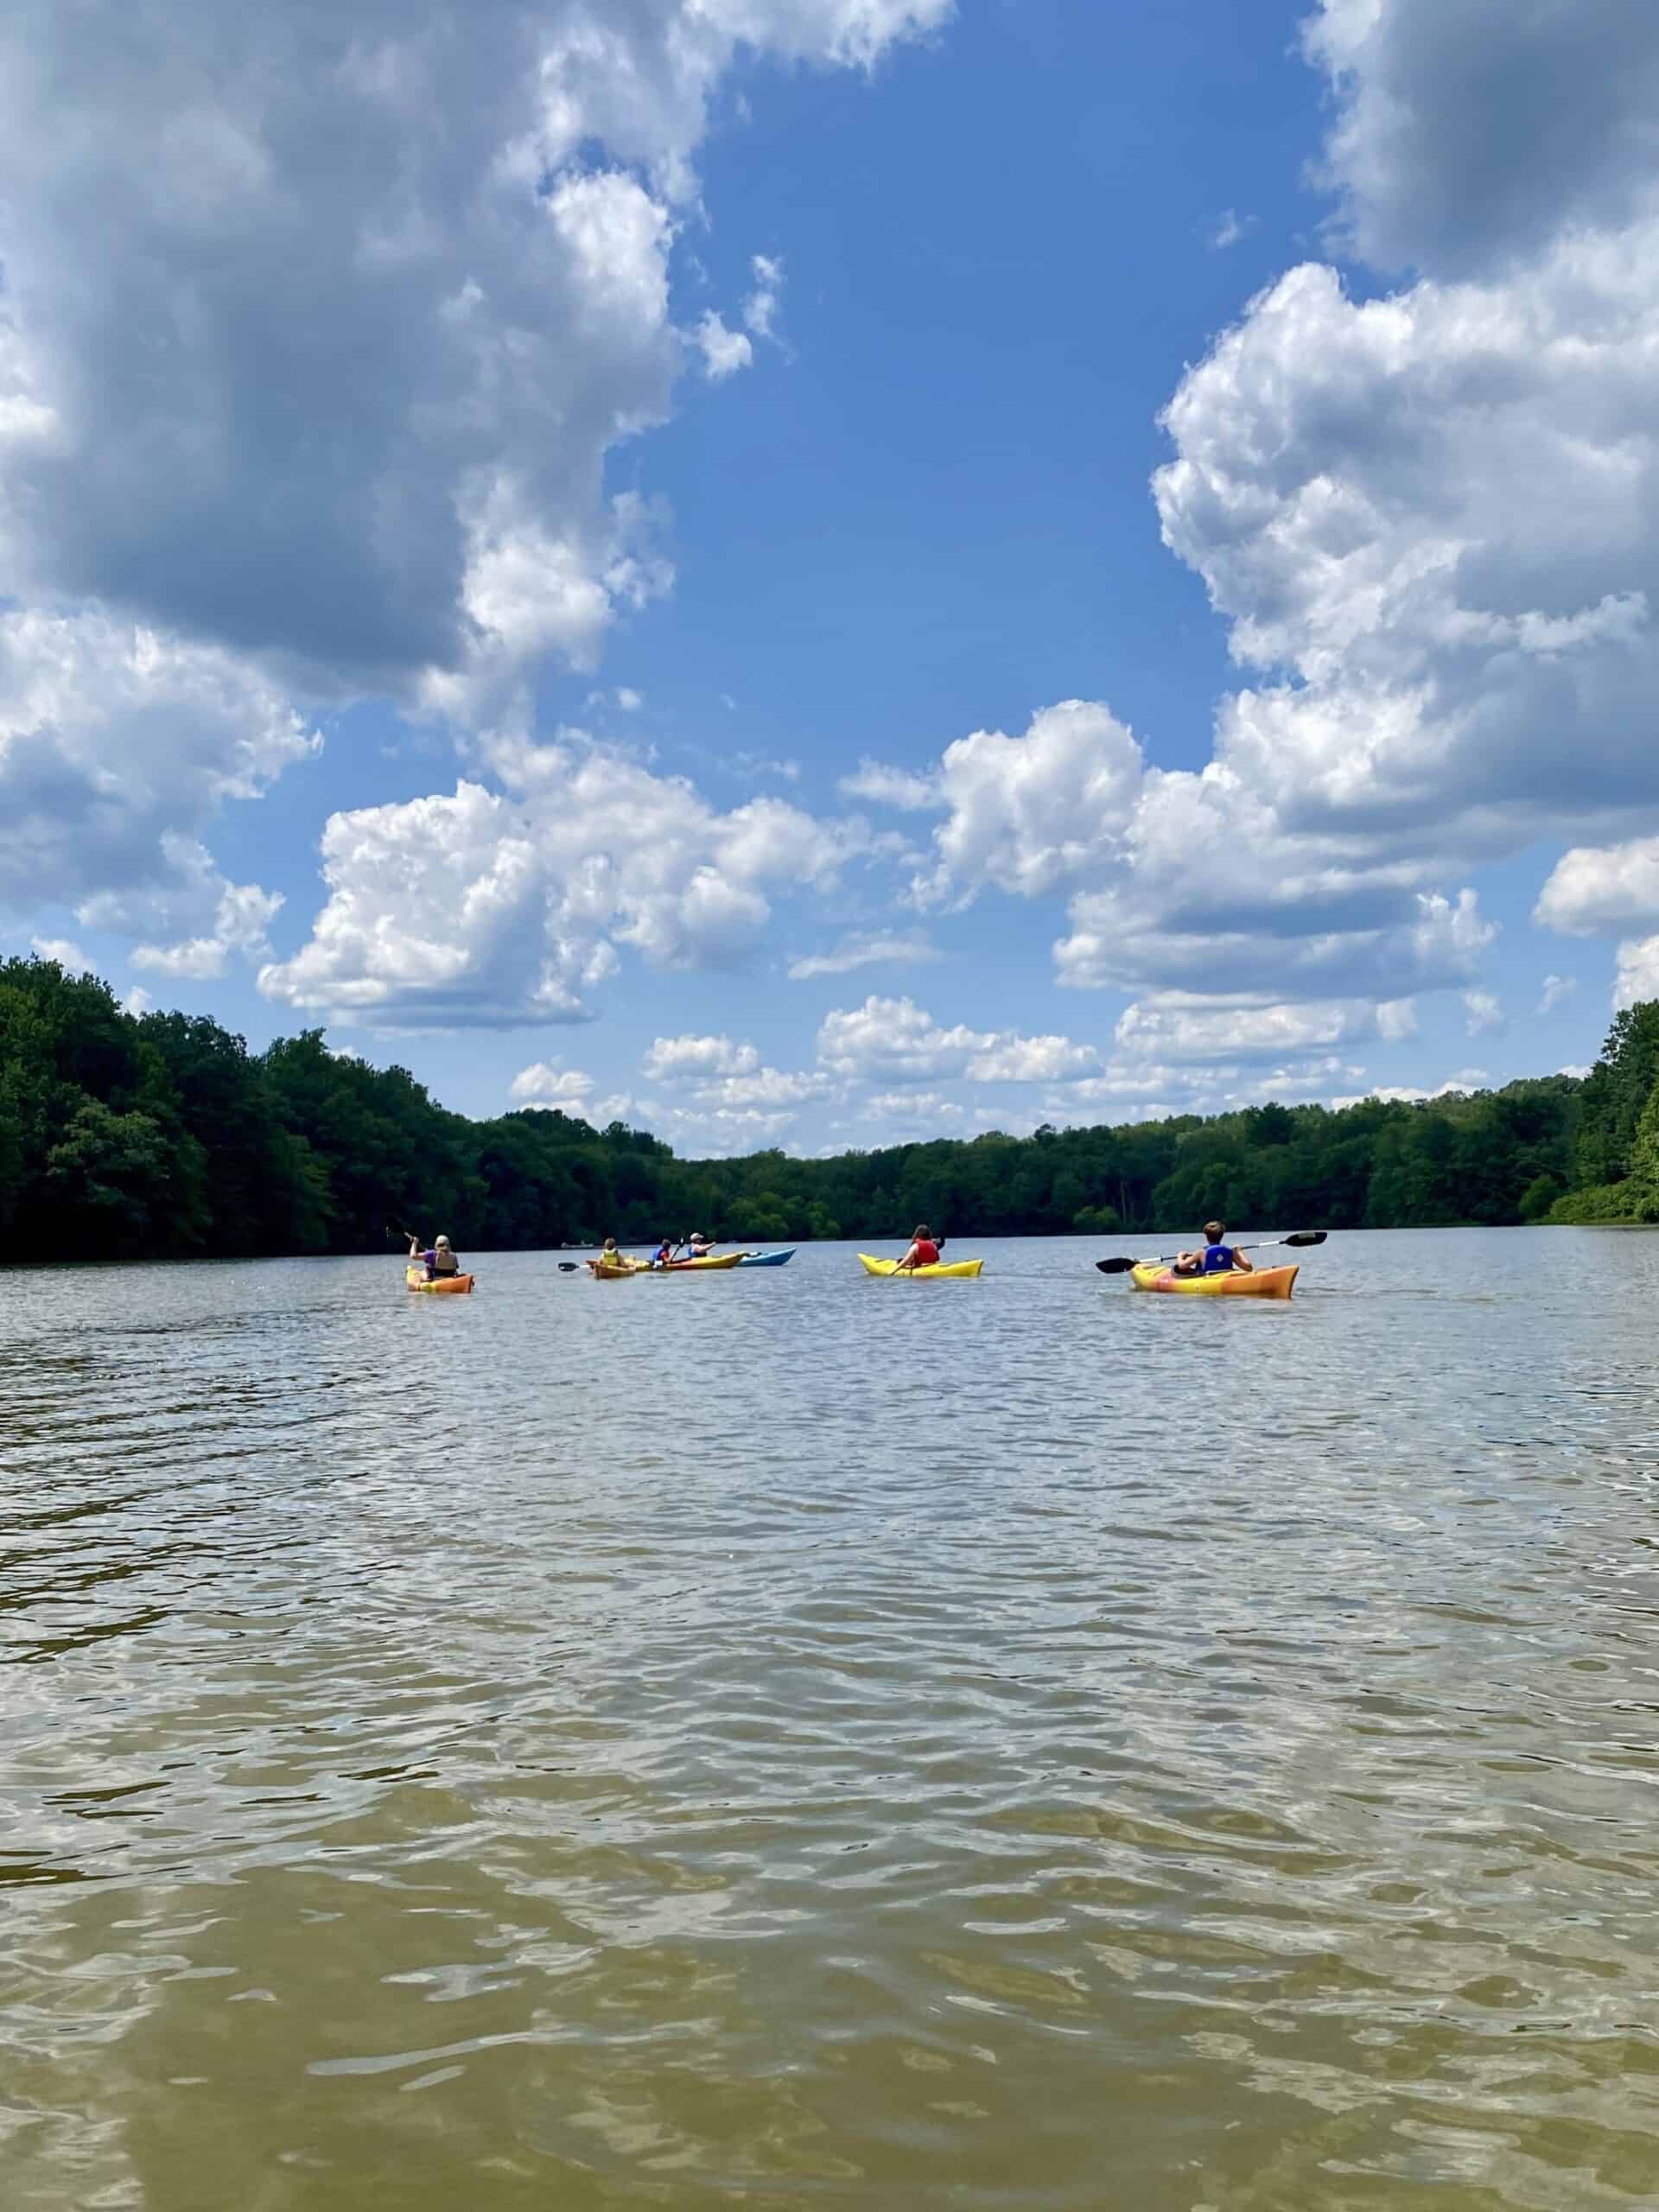 Kids from Crow's Nest Camp in kayaks on the Schuylkill River